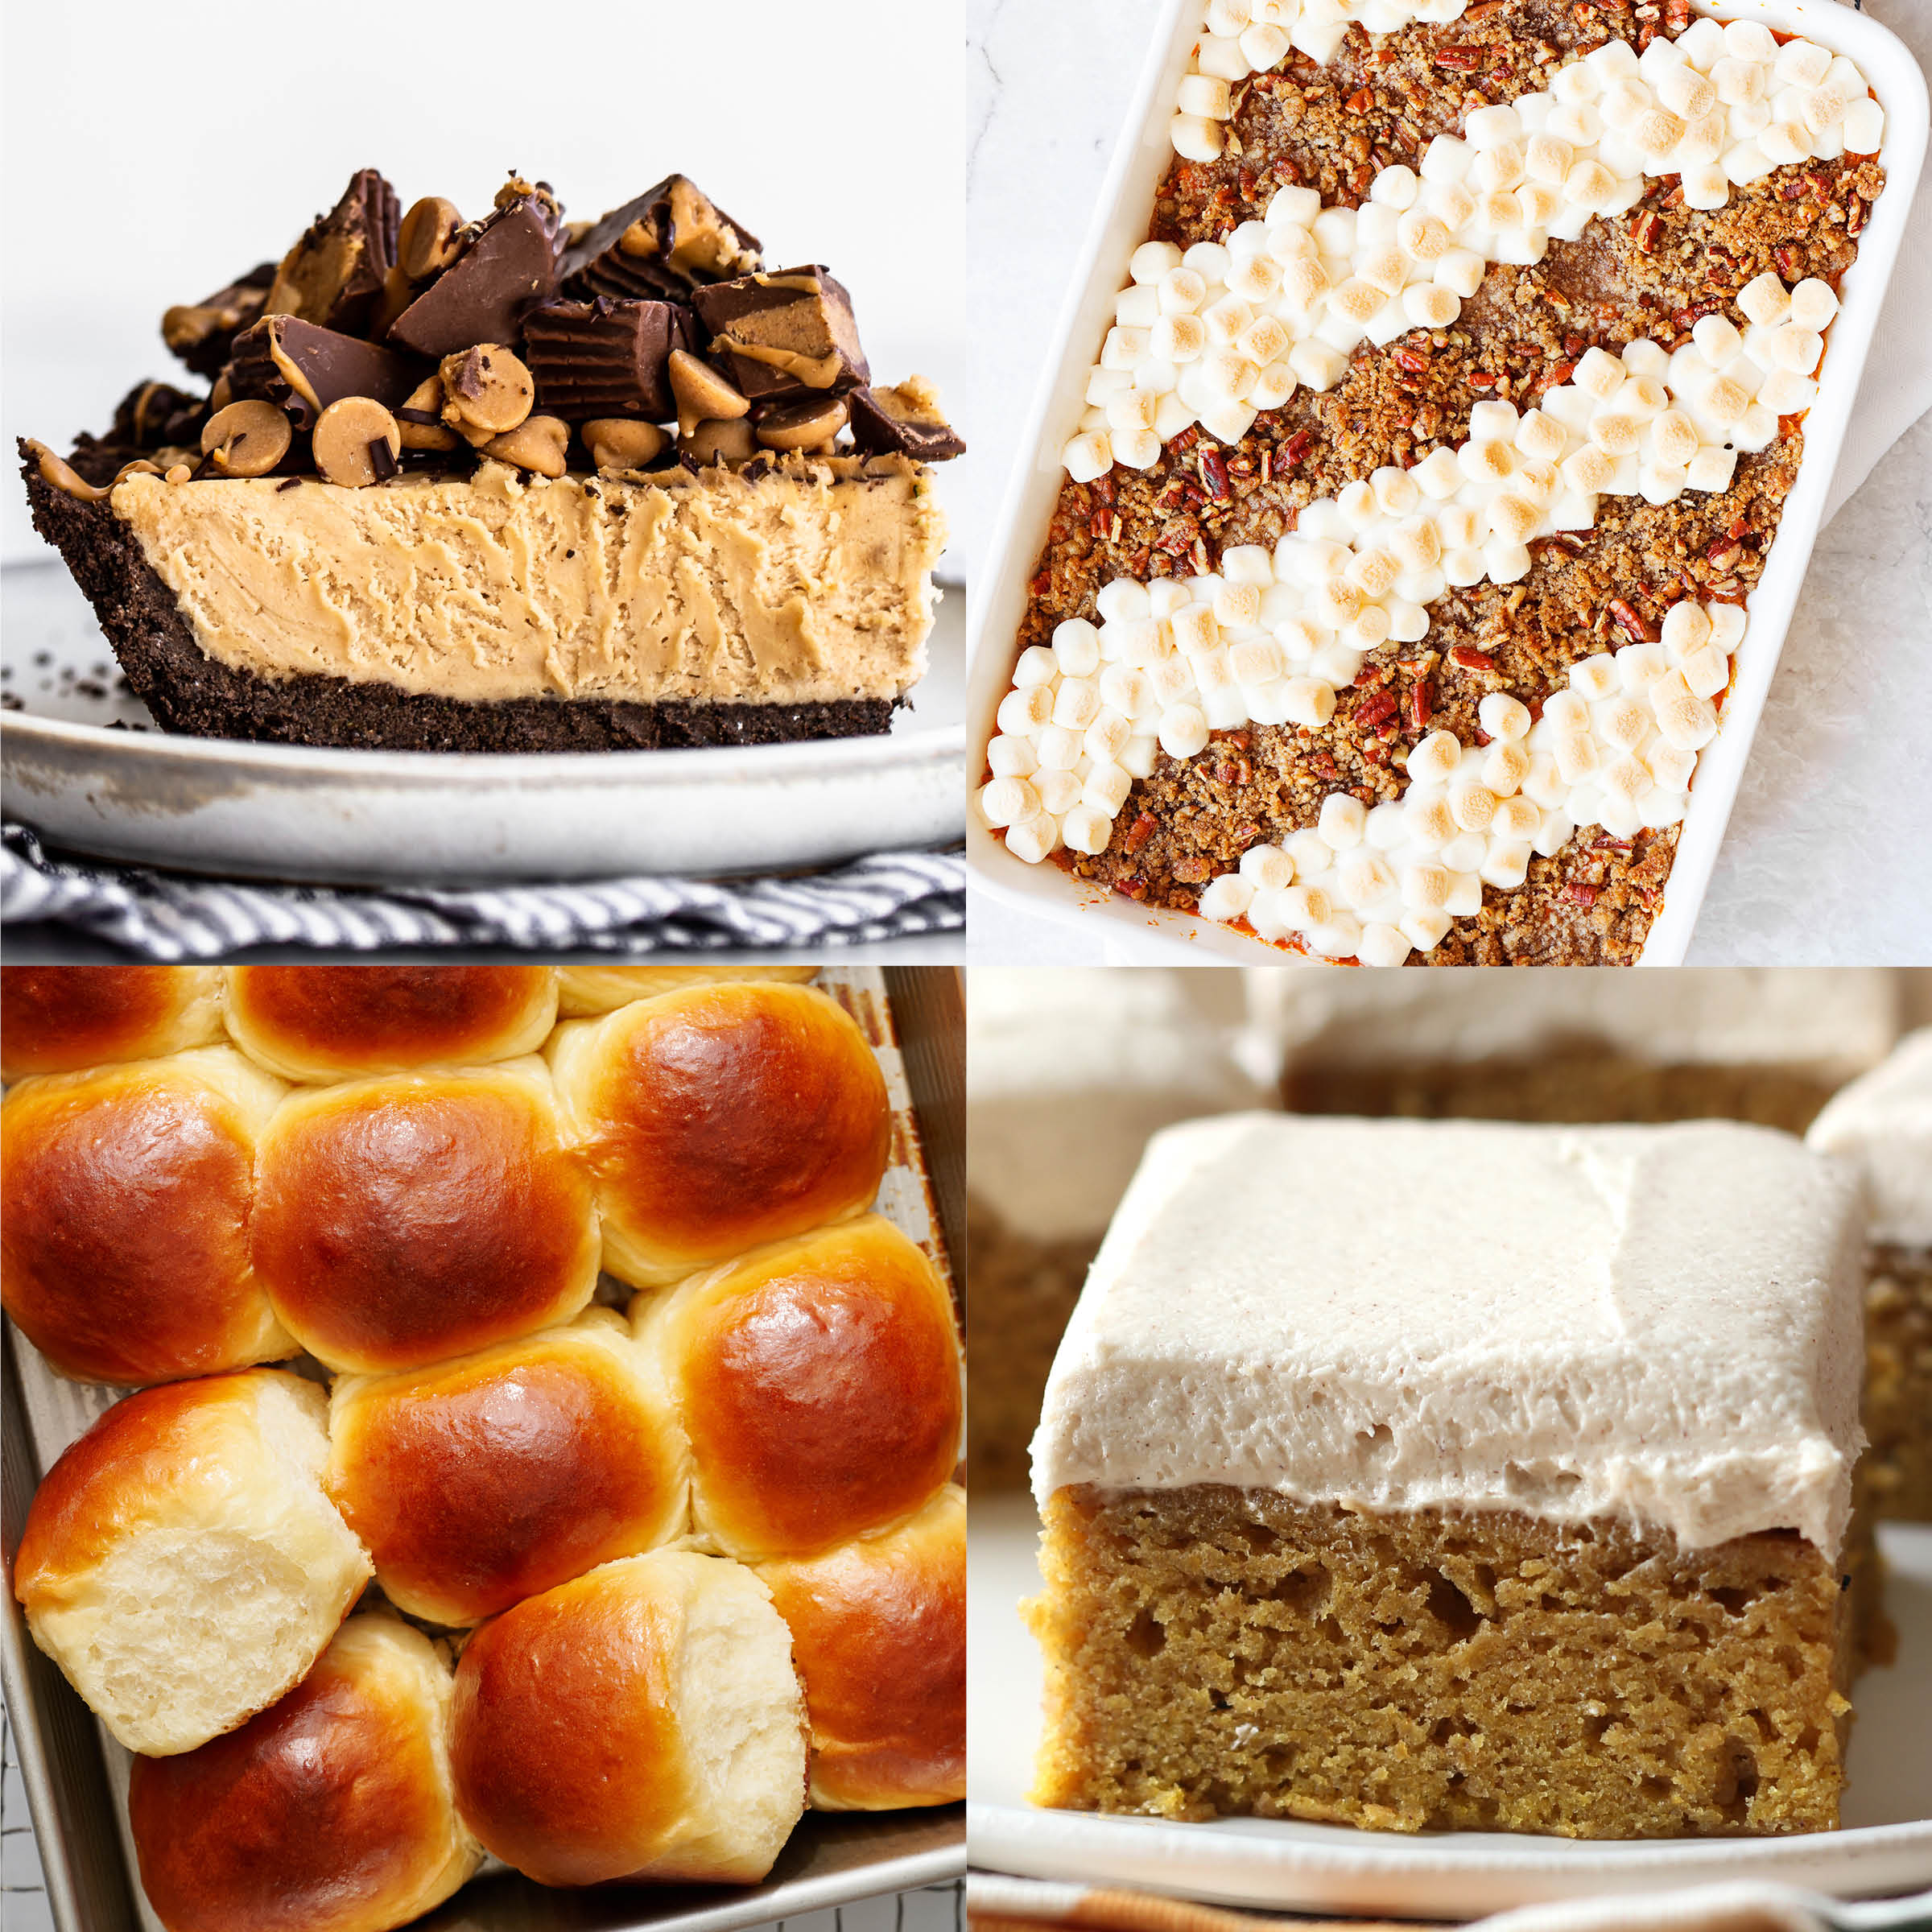 collage of a peanut butter pie, sweet potato casserole, hawaiian bread rolls, and pumpkin bars with brown sugar frosting